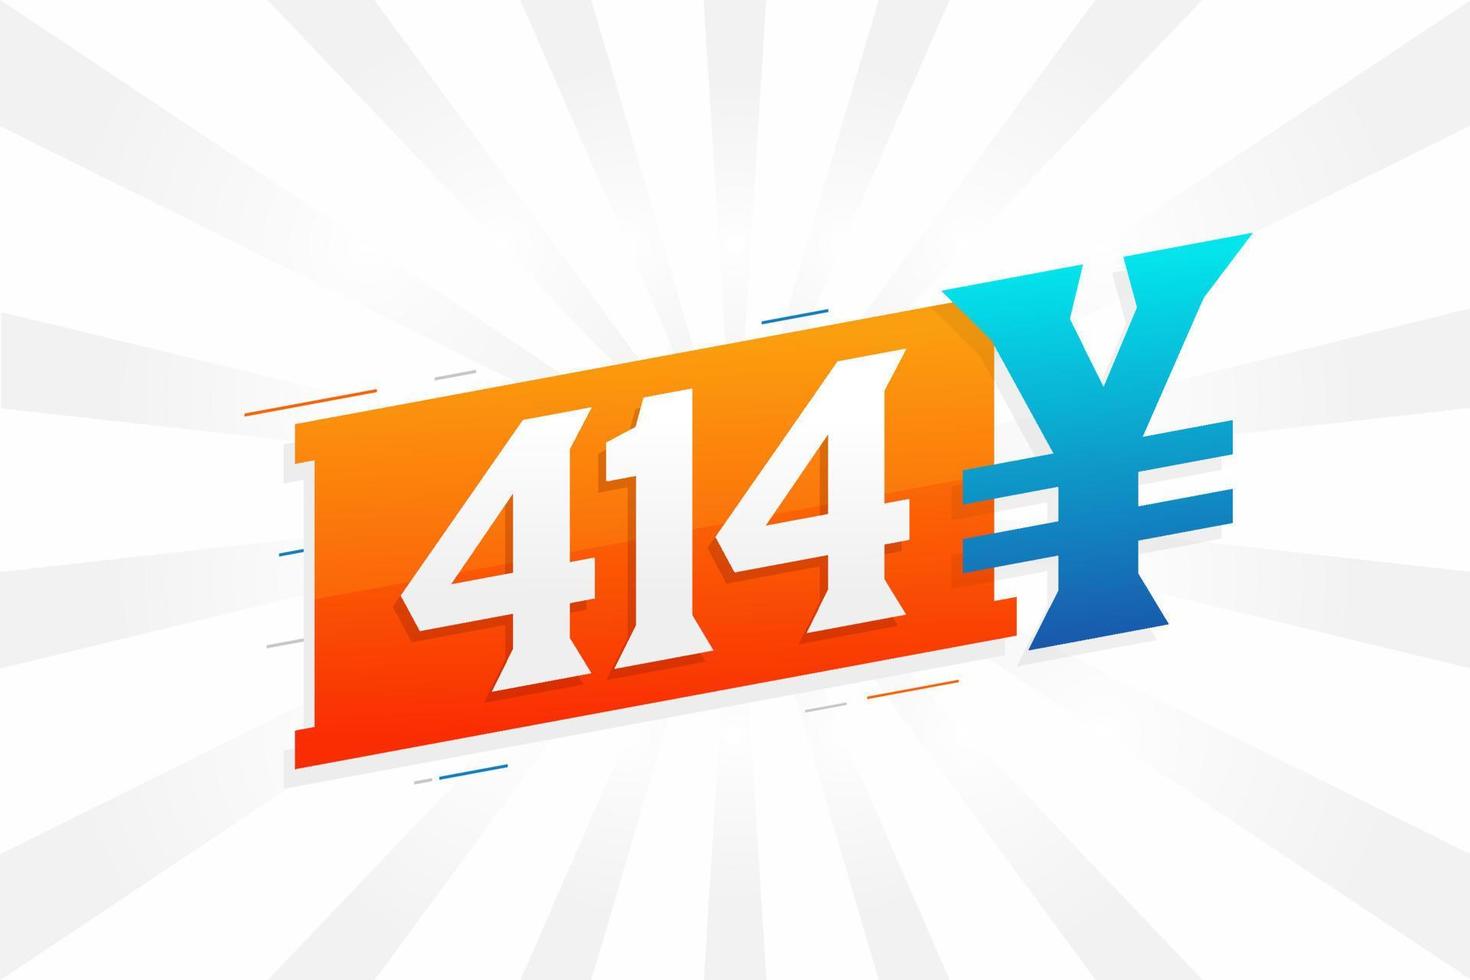 414 Yuan Chinese currency vector text symbol. 414 Yen Japanese currency Money stock vector